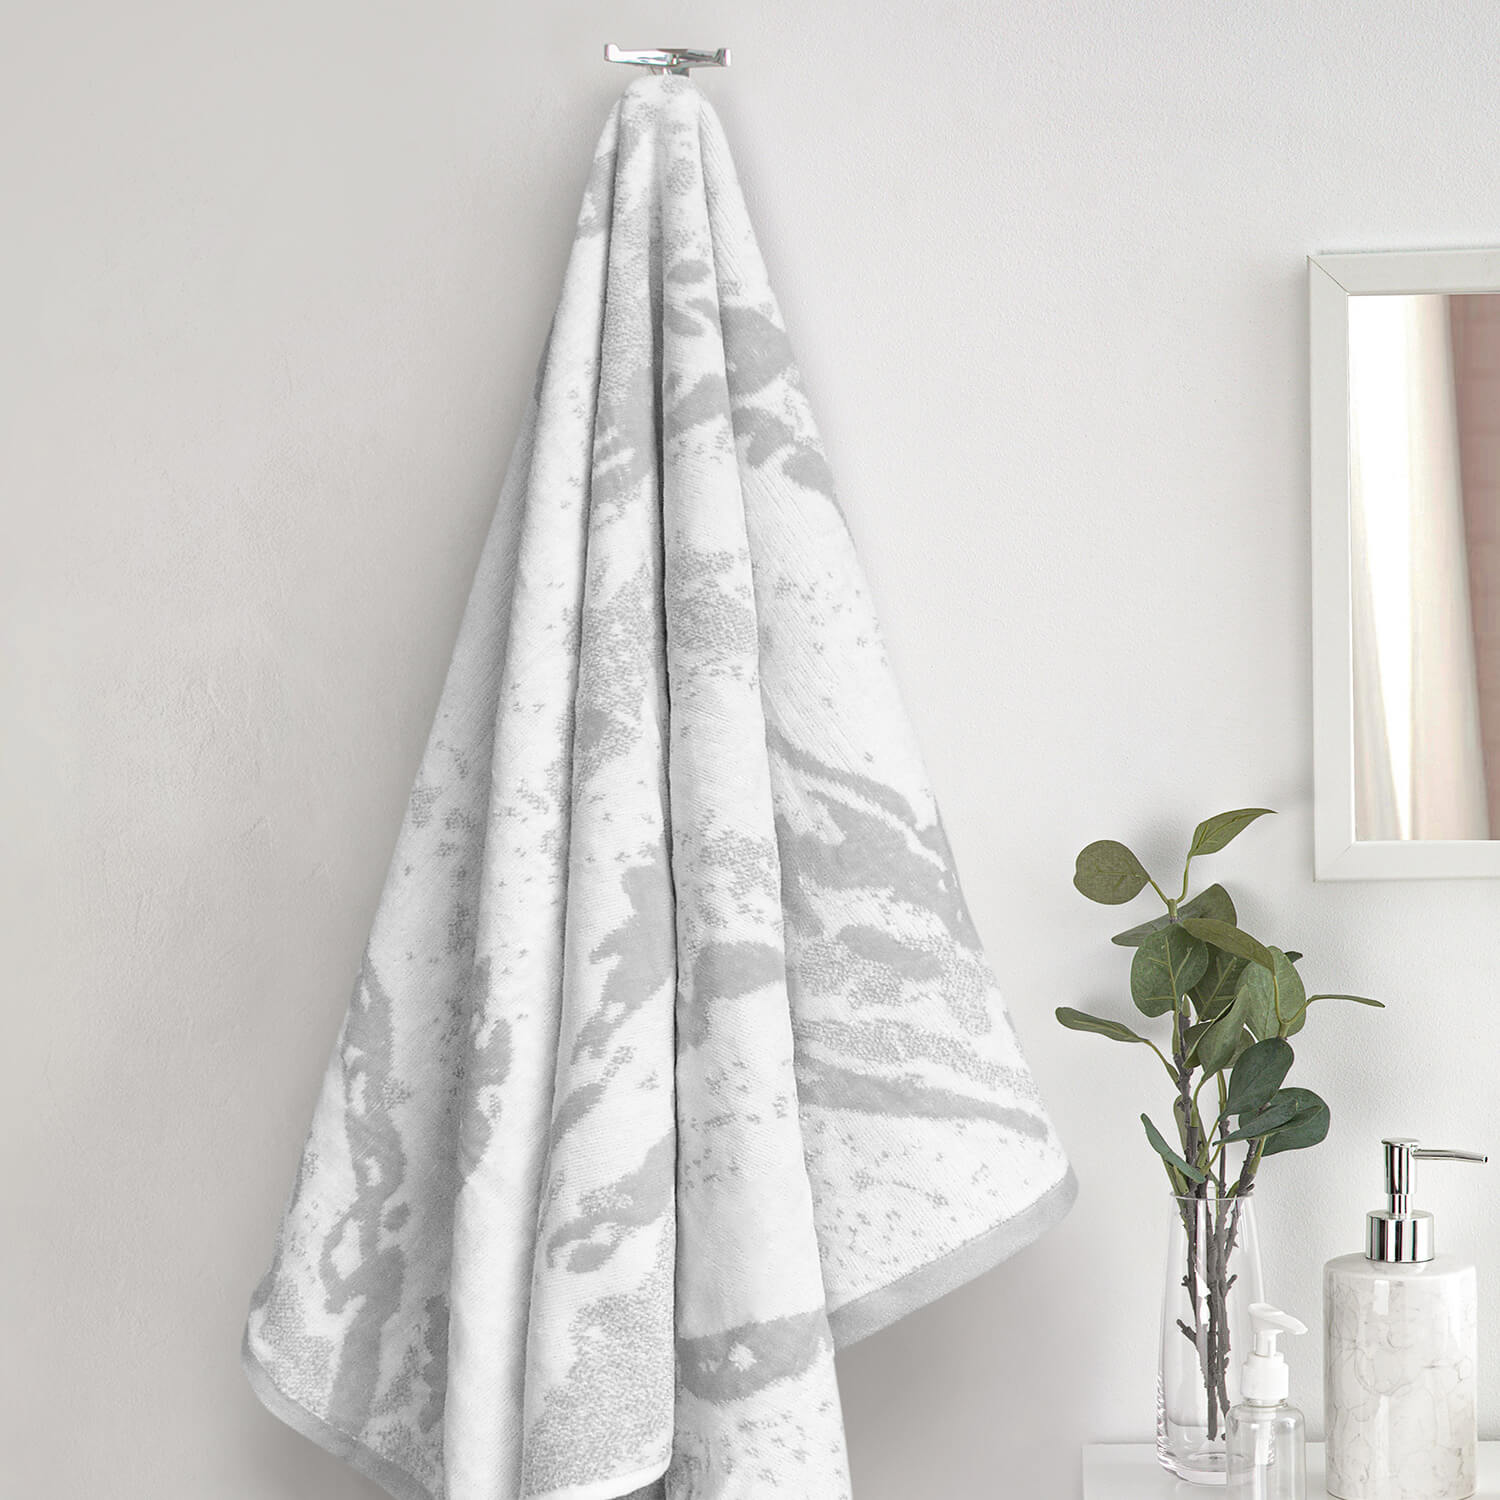 Velosso Marble Bath Towel - Silver 1 Shaws Department Stores